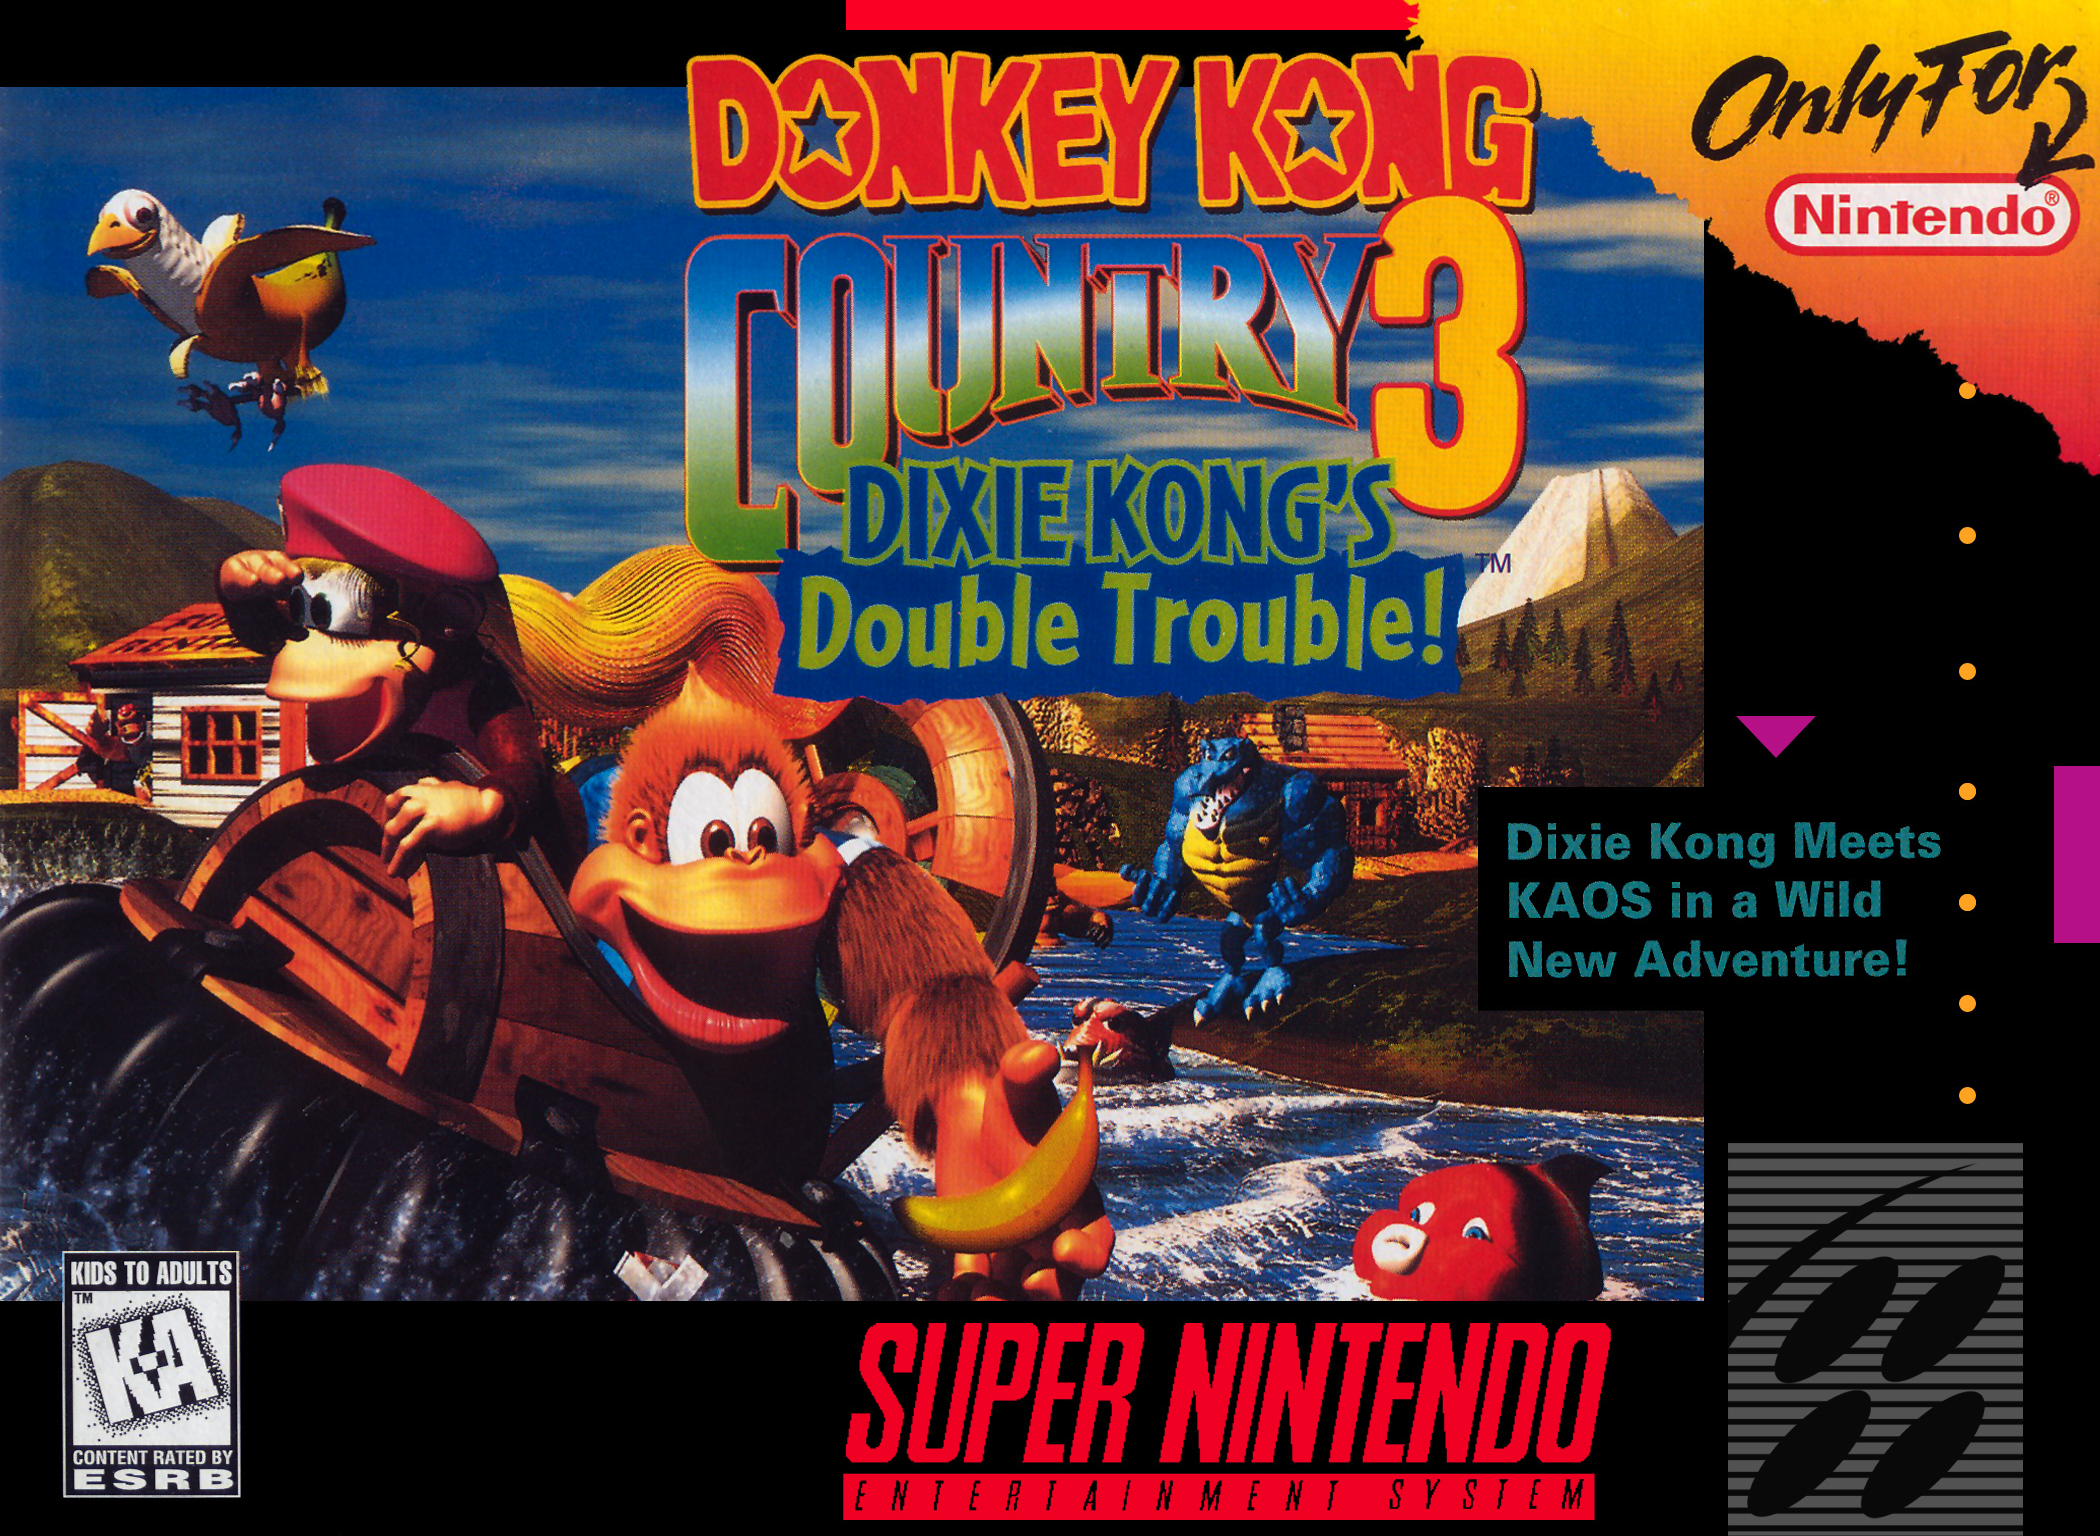 Donkey_Kong_Country_3_-_Dixie_Kong's_Double_Trouble!_(NA).png